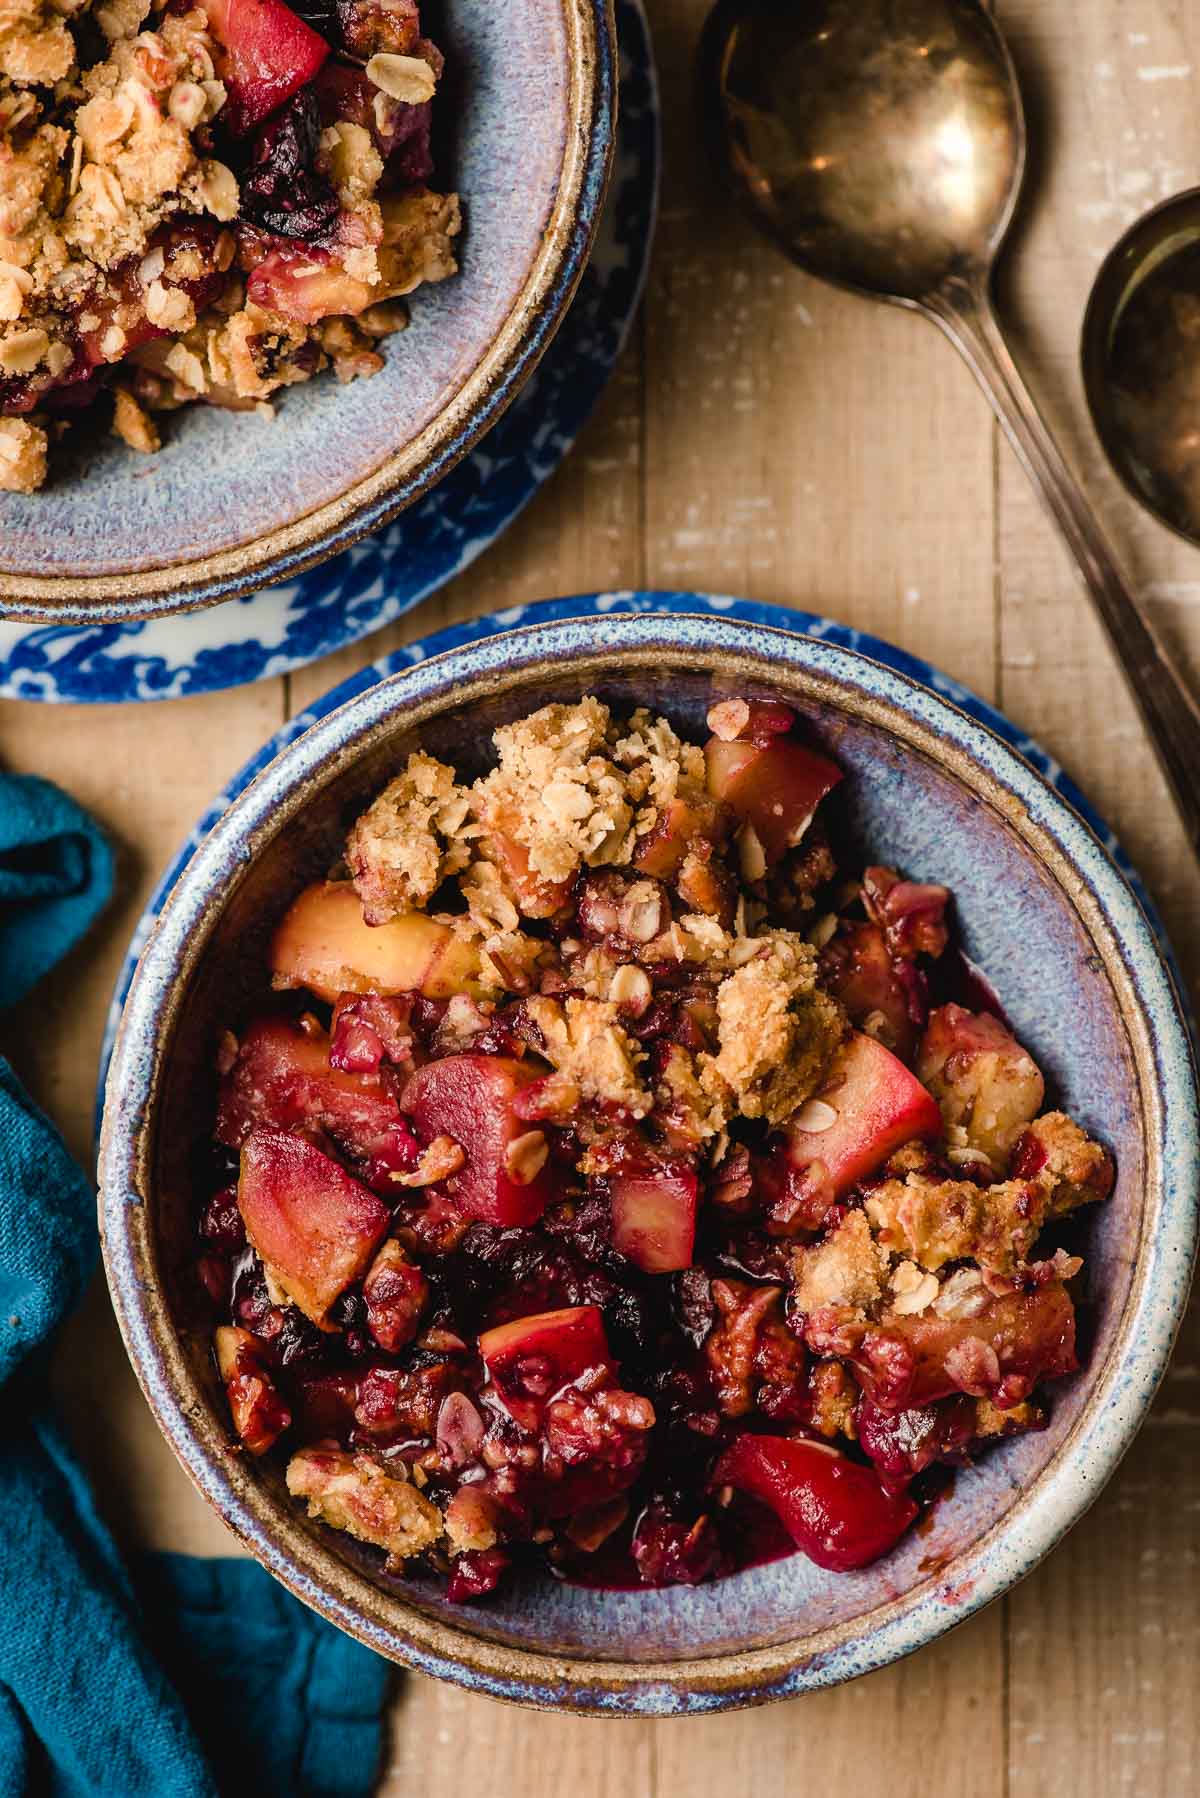 Apple and blueberry crumble in a blue clay bowl.